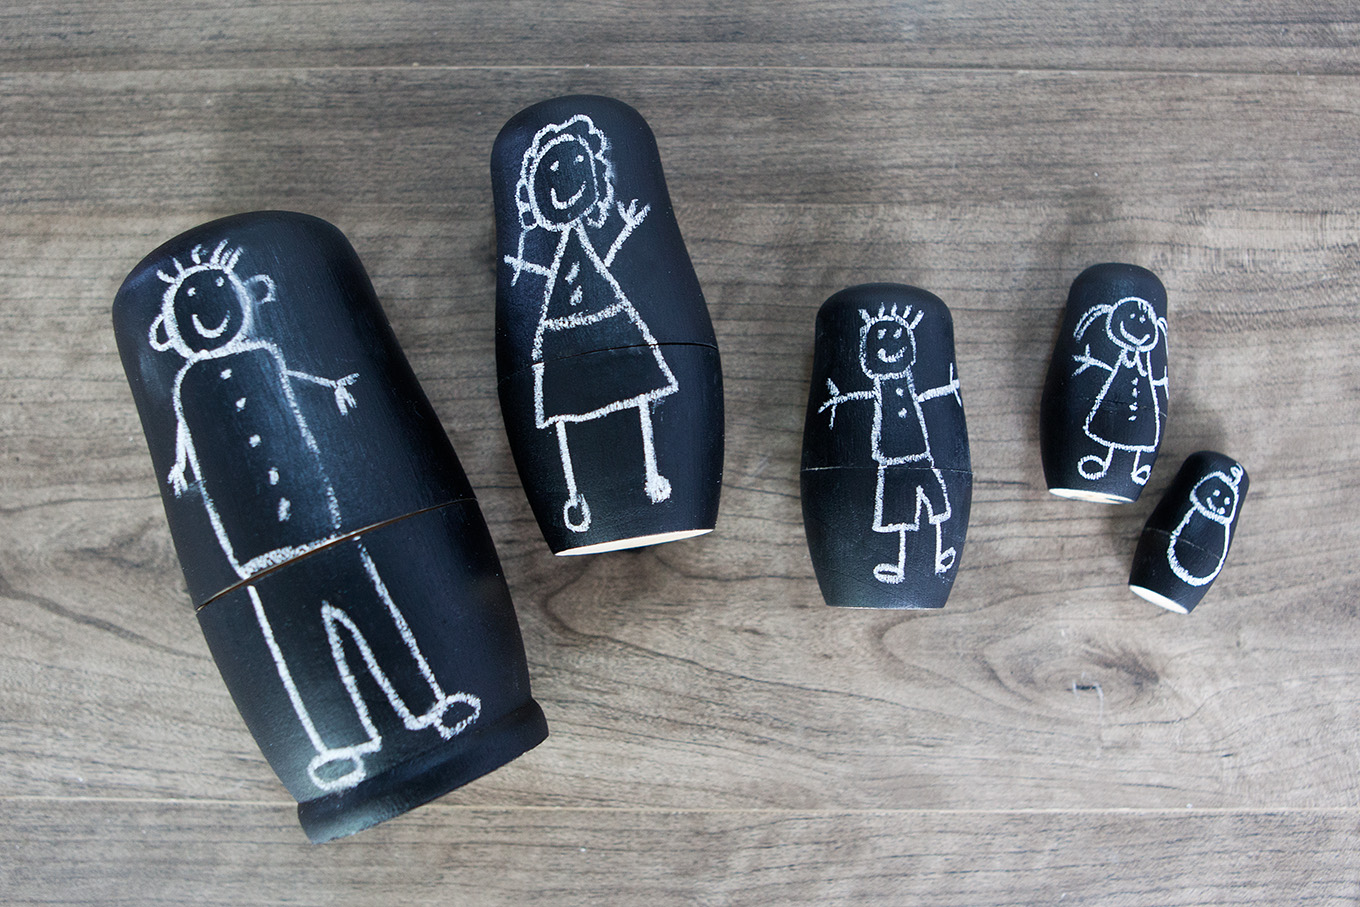 These DIY Chalkboard Matryoshka Nesting Dolls are an adorable, handmade toy your kids will love making! They can personalize the dolls again and again with nothing more than a piece of chalk.